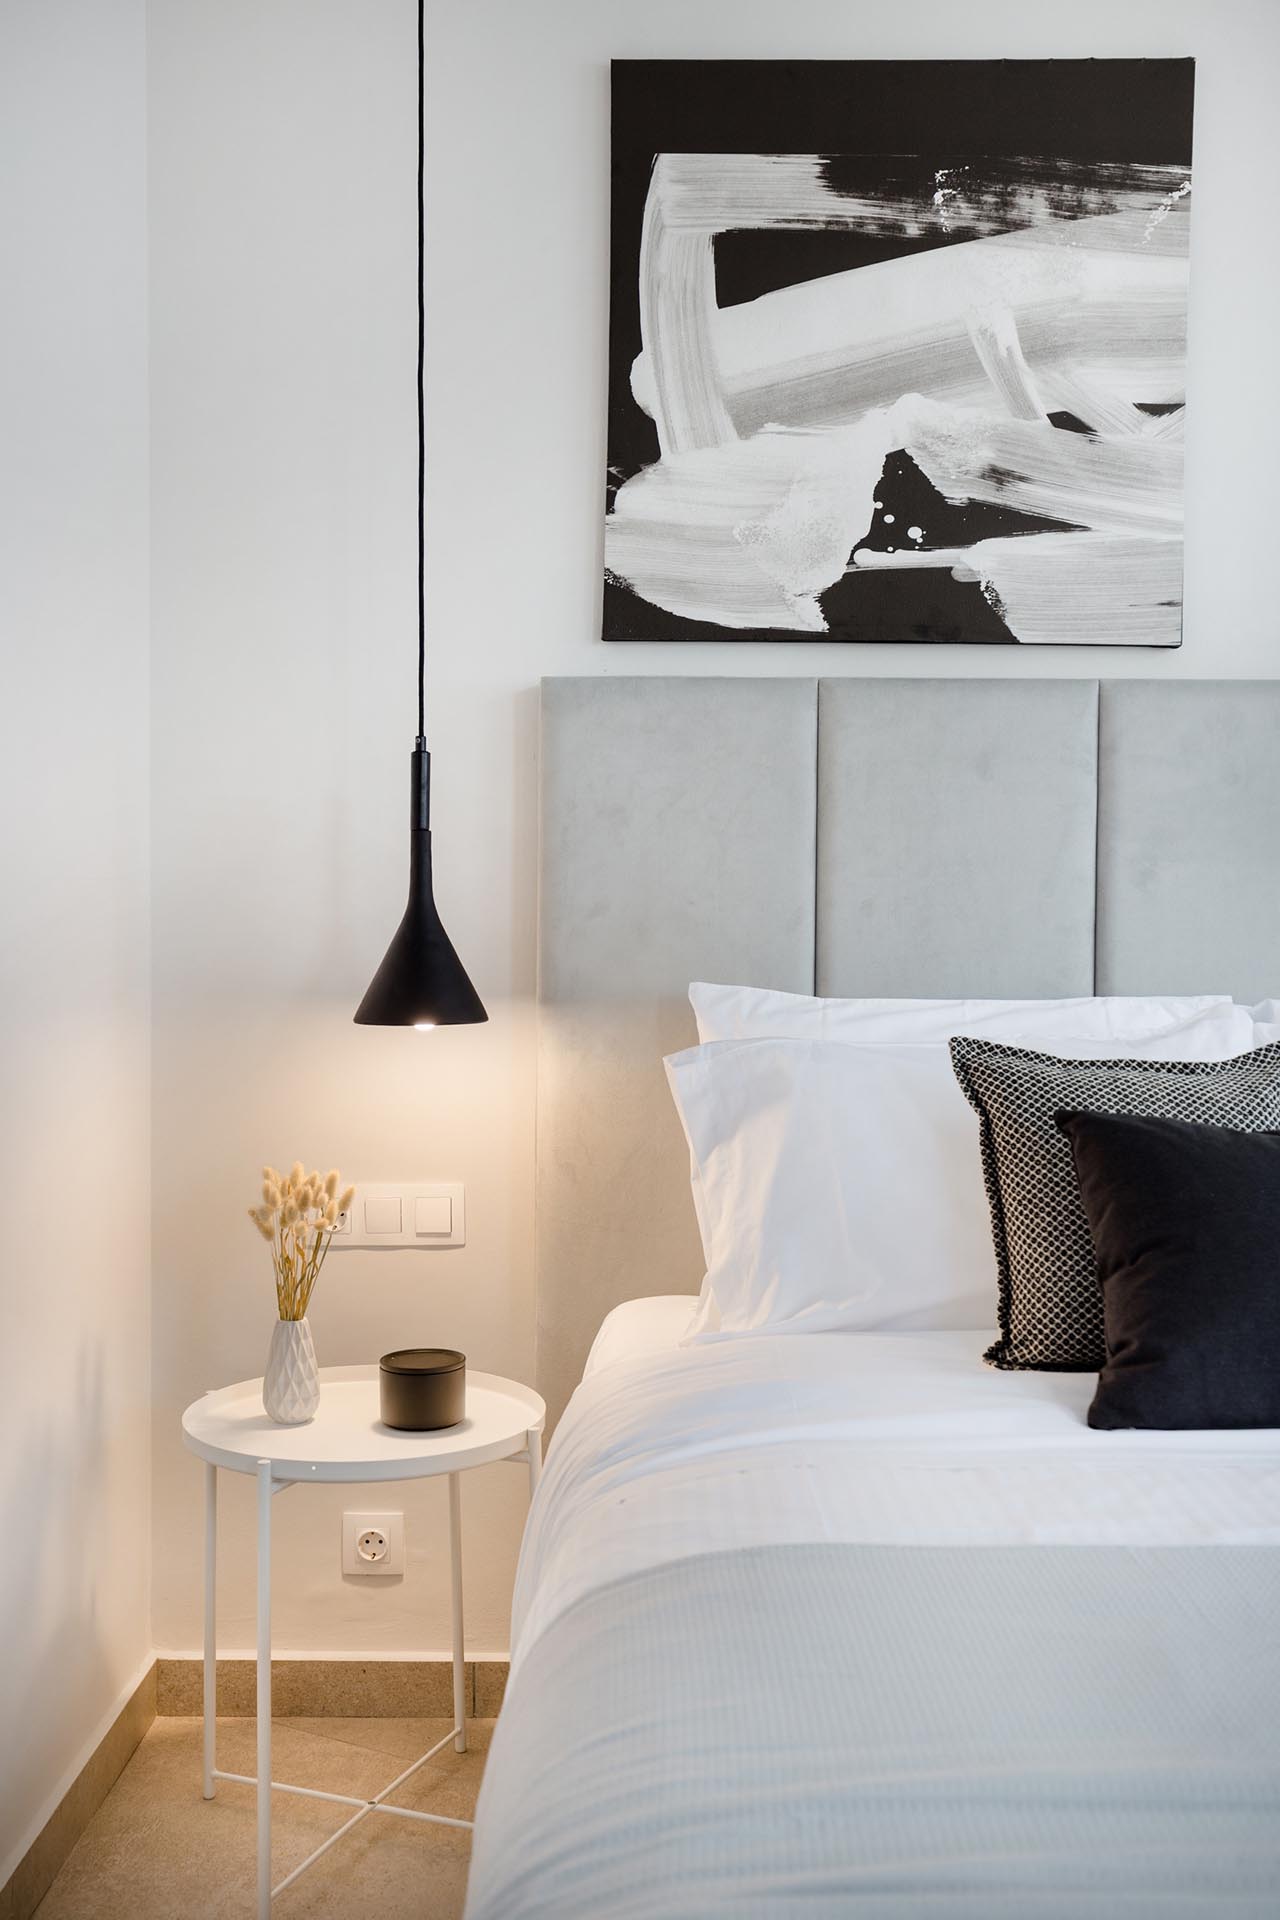 A modern bedroom where the color palette is filled with grays, black and white. At night, the pendant lights beside the bed add a warm glow.